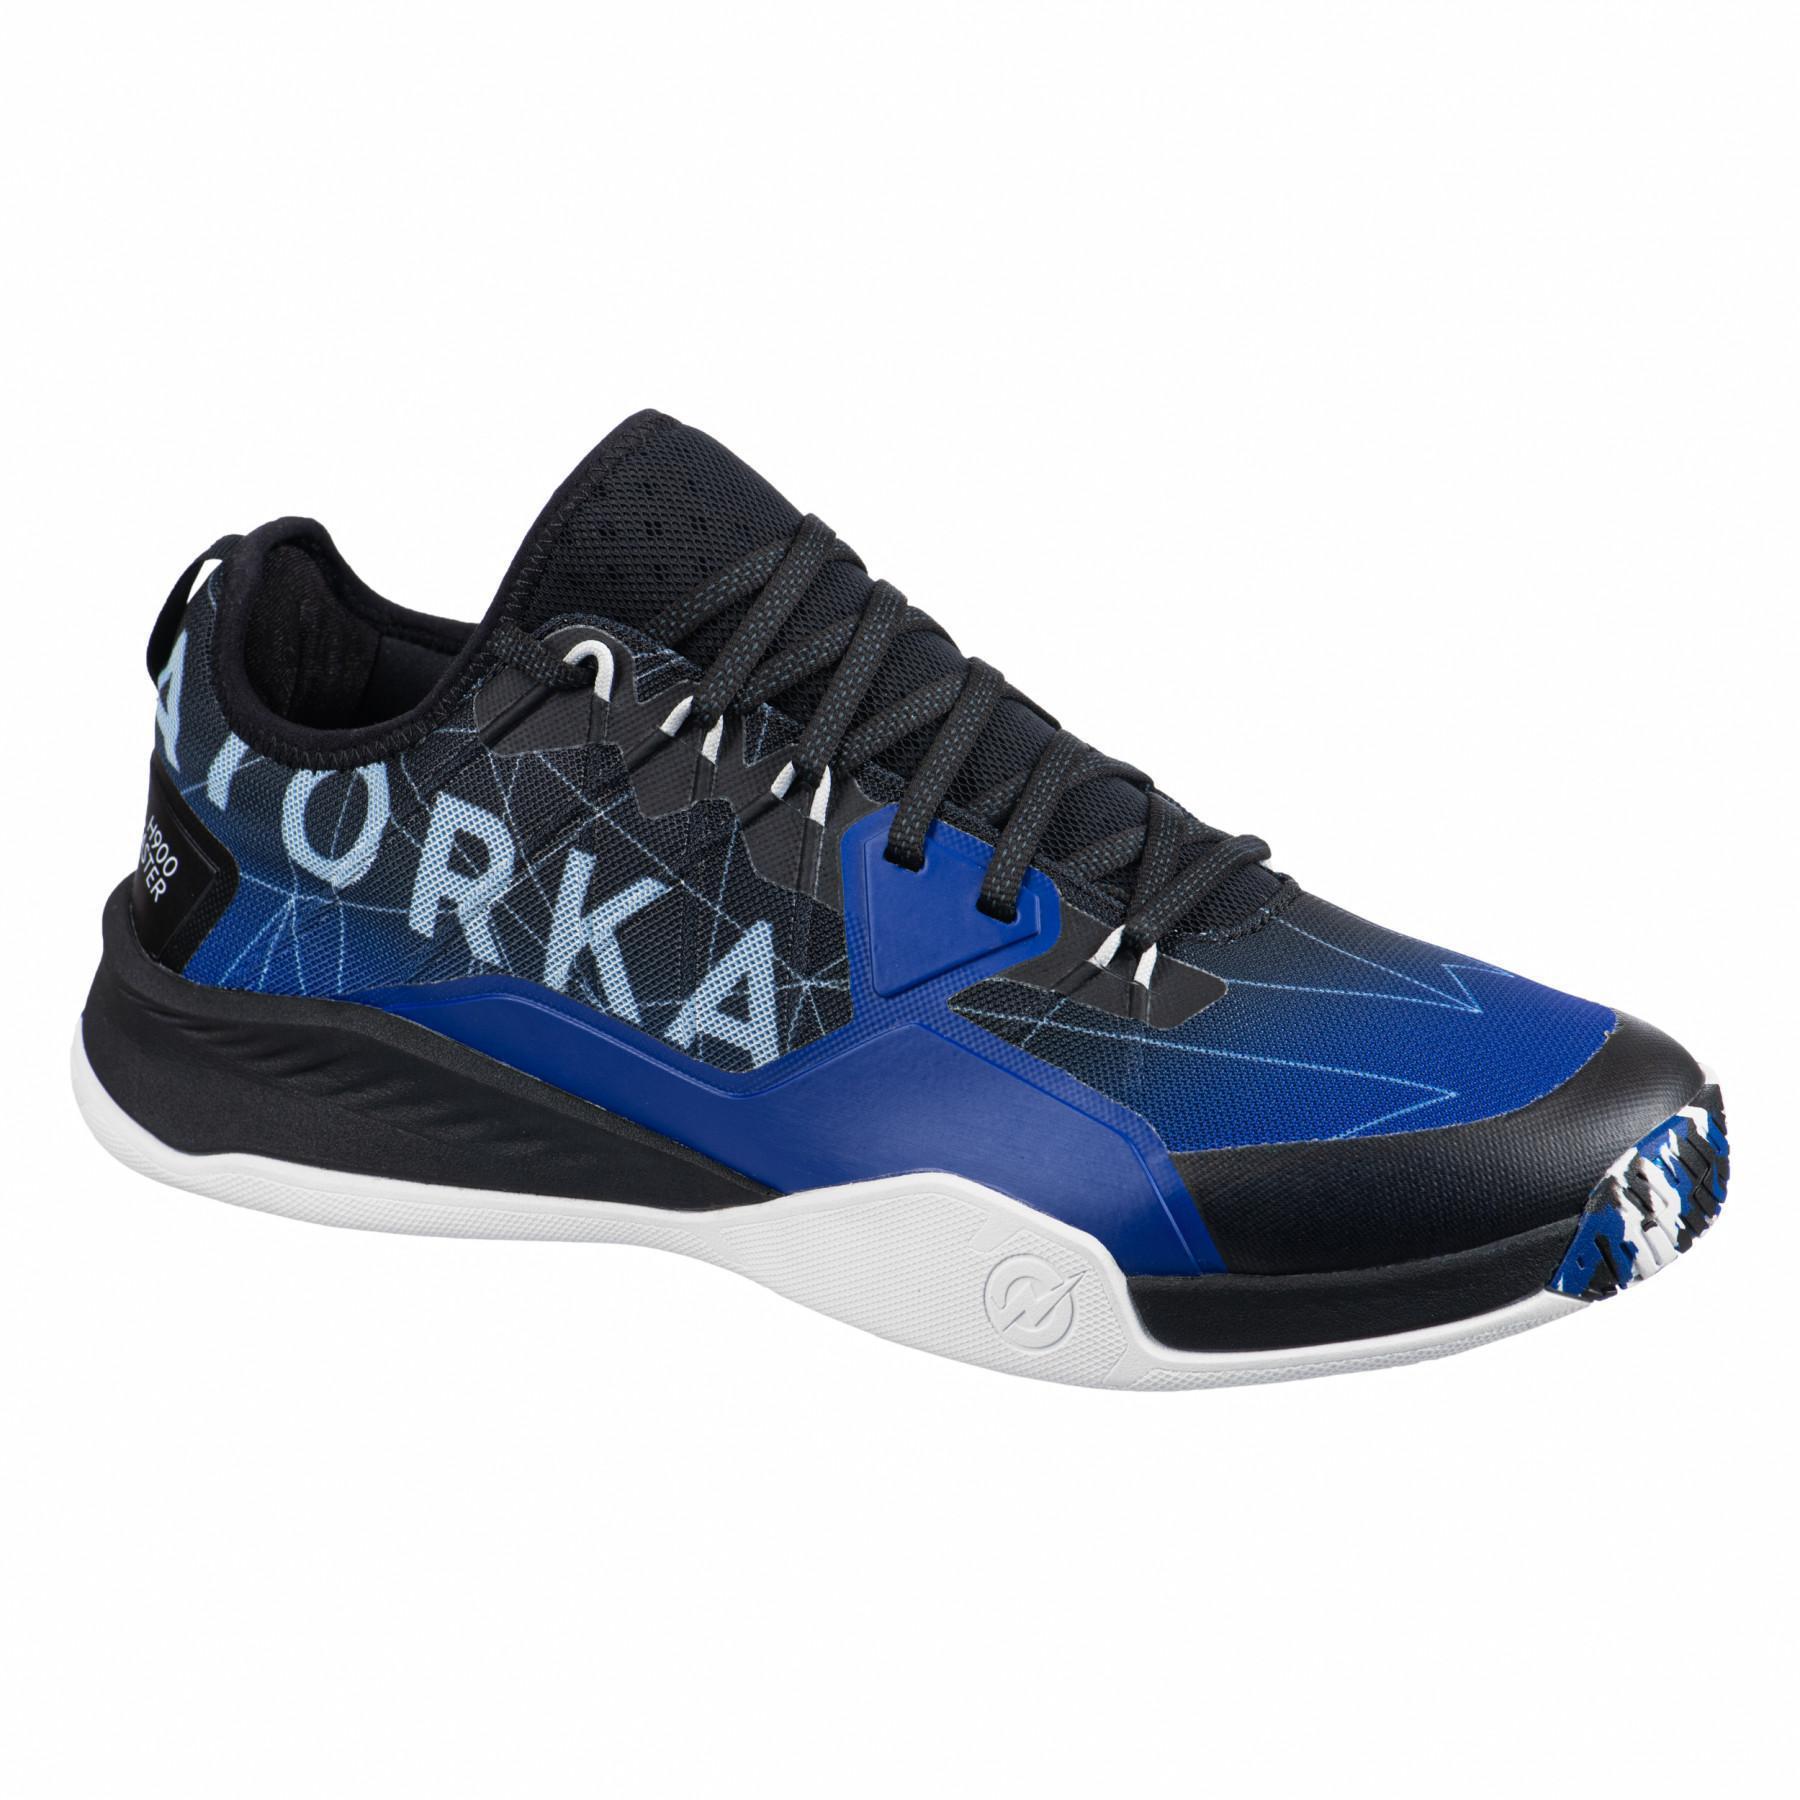 Shoes Atorka H900 Faster